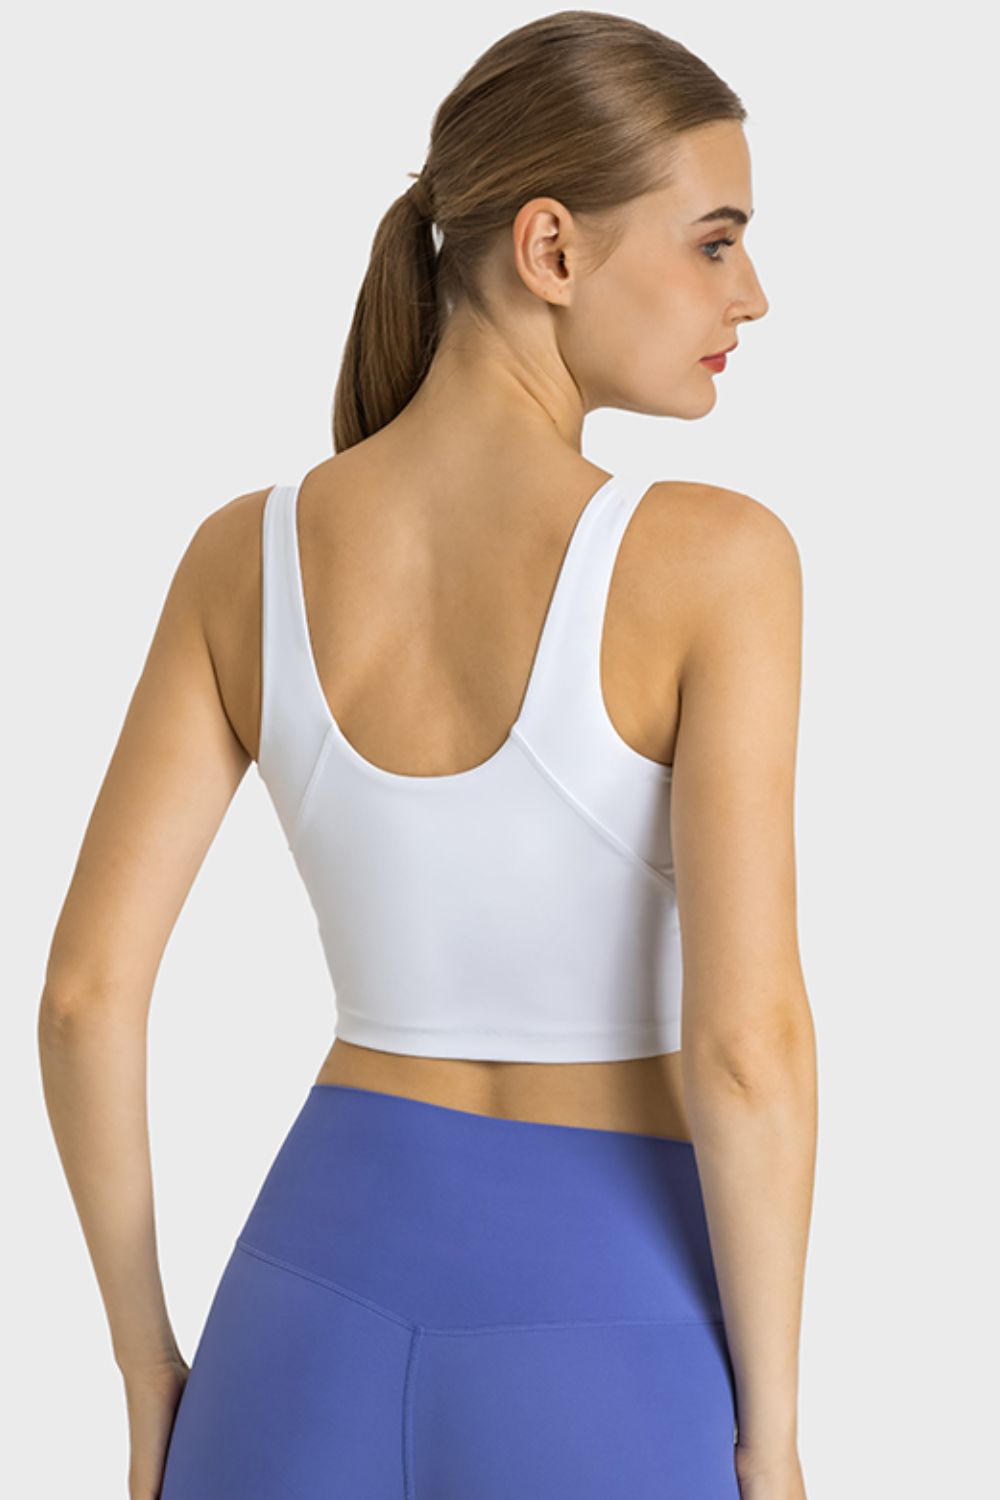 Feel Like Skin Highly Stretchy Cropped Sports Tank Active Tank